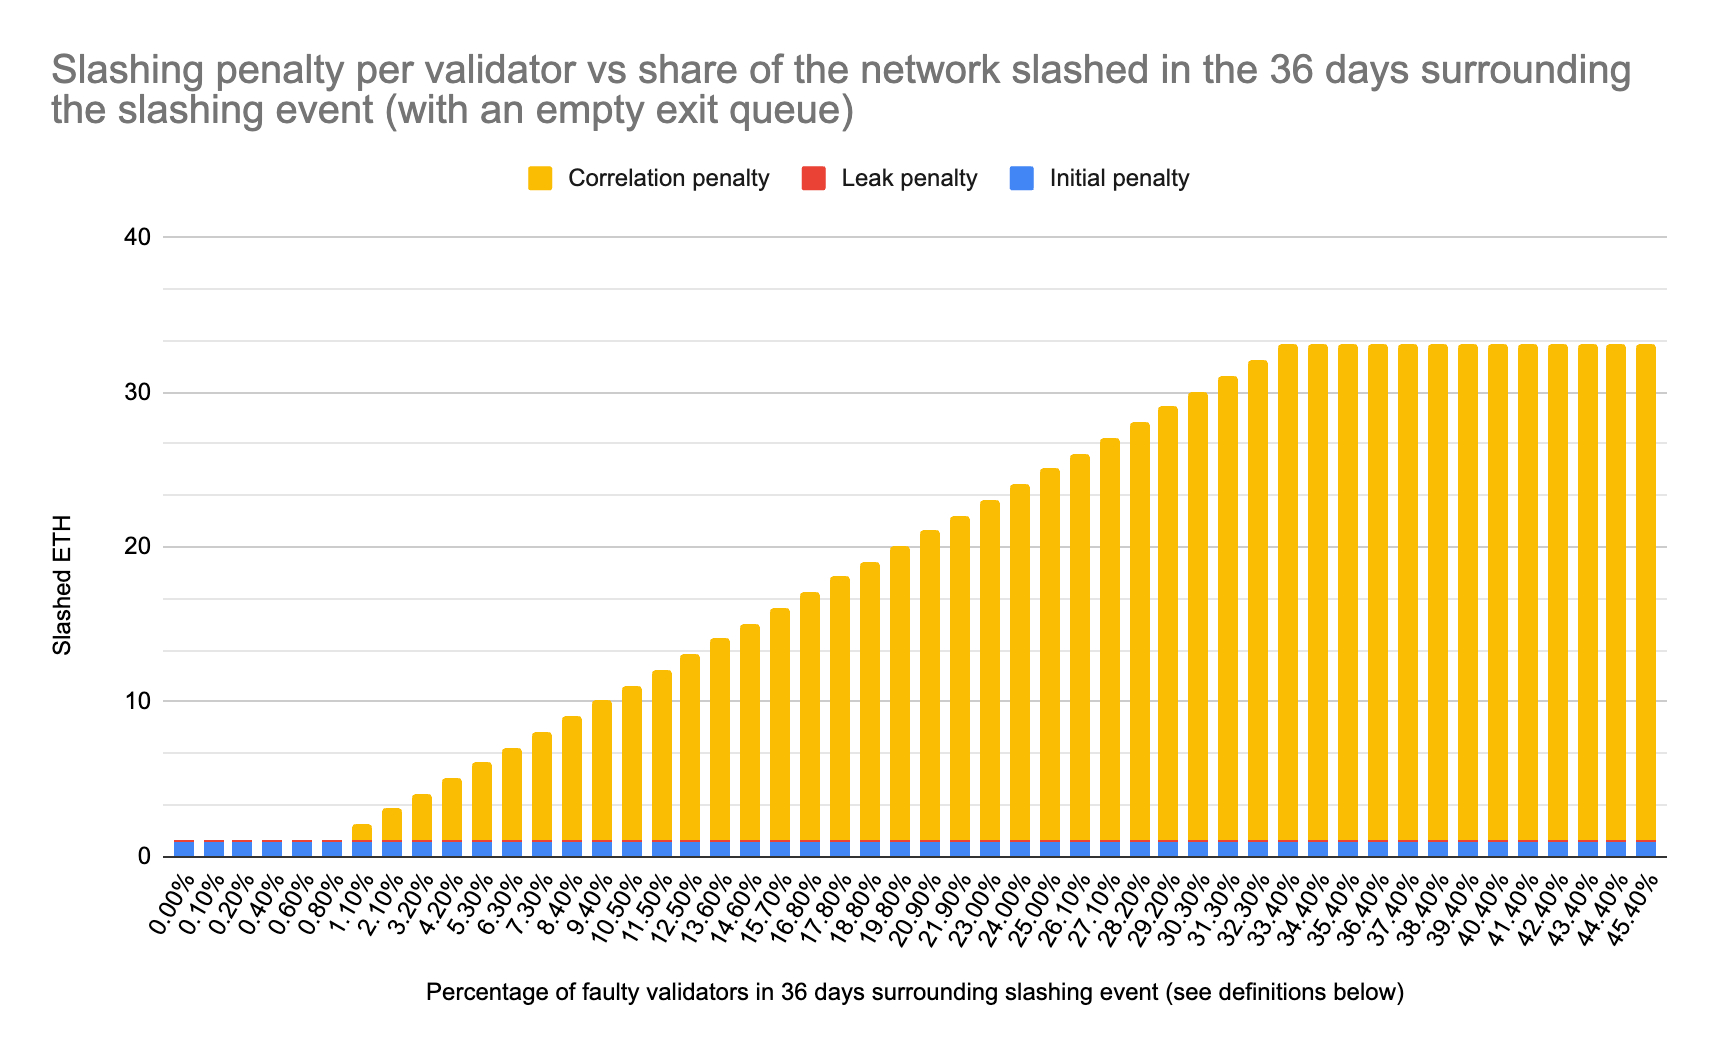 The more validators that are slashed on Ethereum around the same time, the higher the correlation penalty. Source: Kiln - Useful Ethereum Spreadsheets: Correlated slashing penalties 